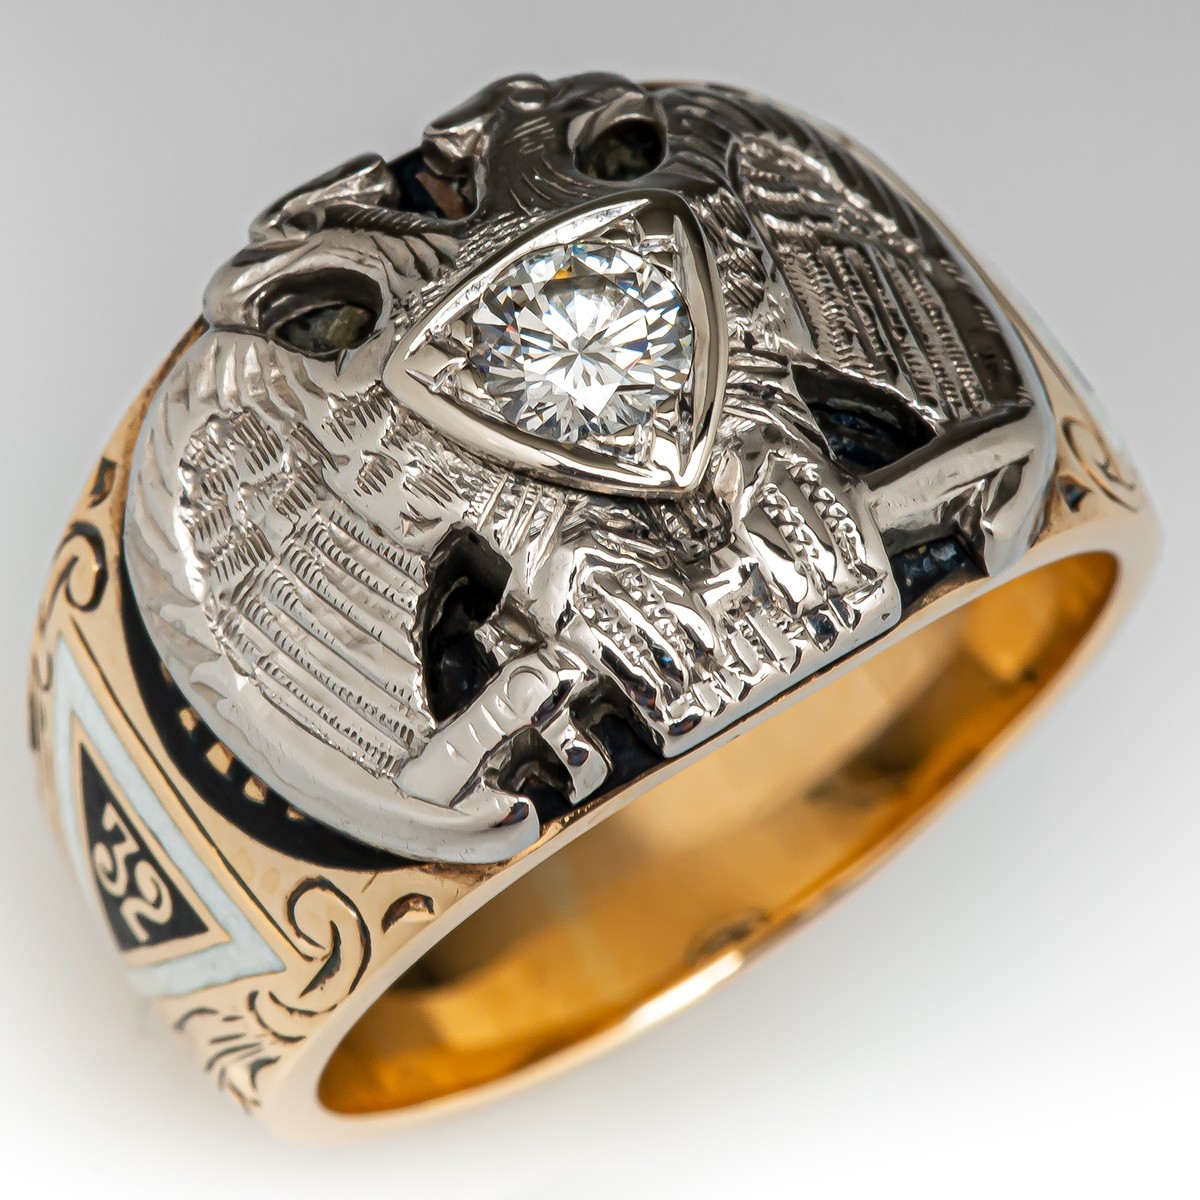 Blue Lodge Rings: The Masonic Supply Shop is a distributor of quality Masonic  rings, watches, & Jewellery at competitive prices proudly serving the  International Masonic Fraternity.